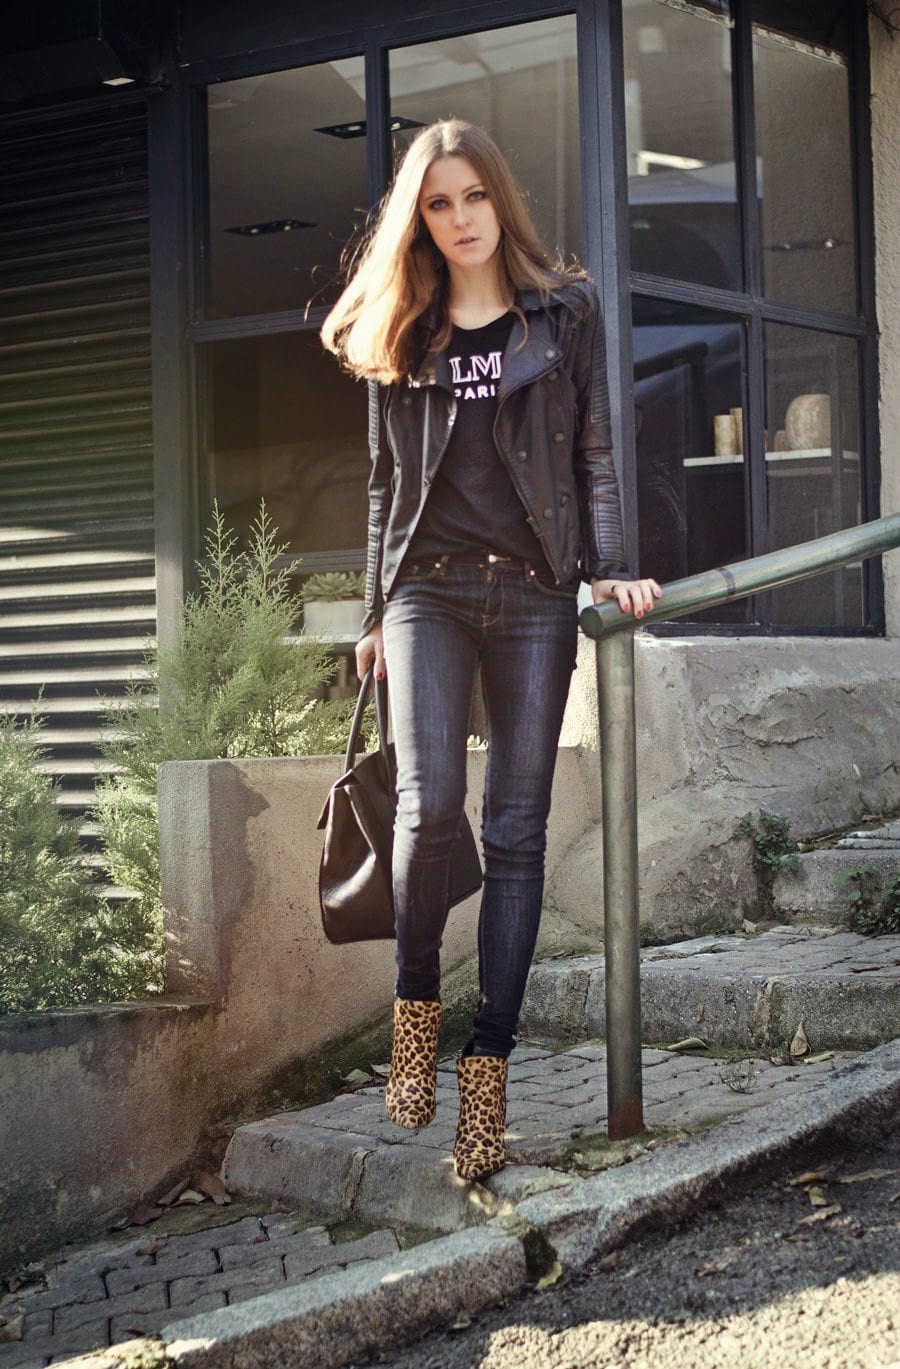 Rocker Chic Outfits 17 Tips How To Dress Like a Rocker Chic